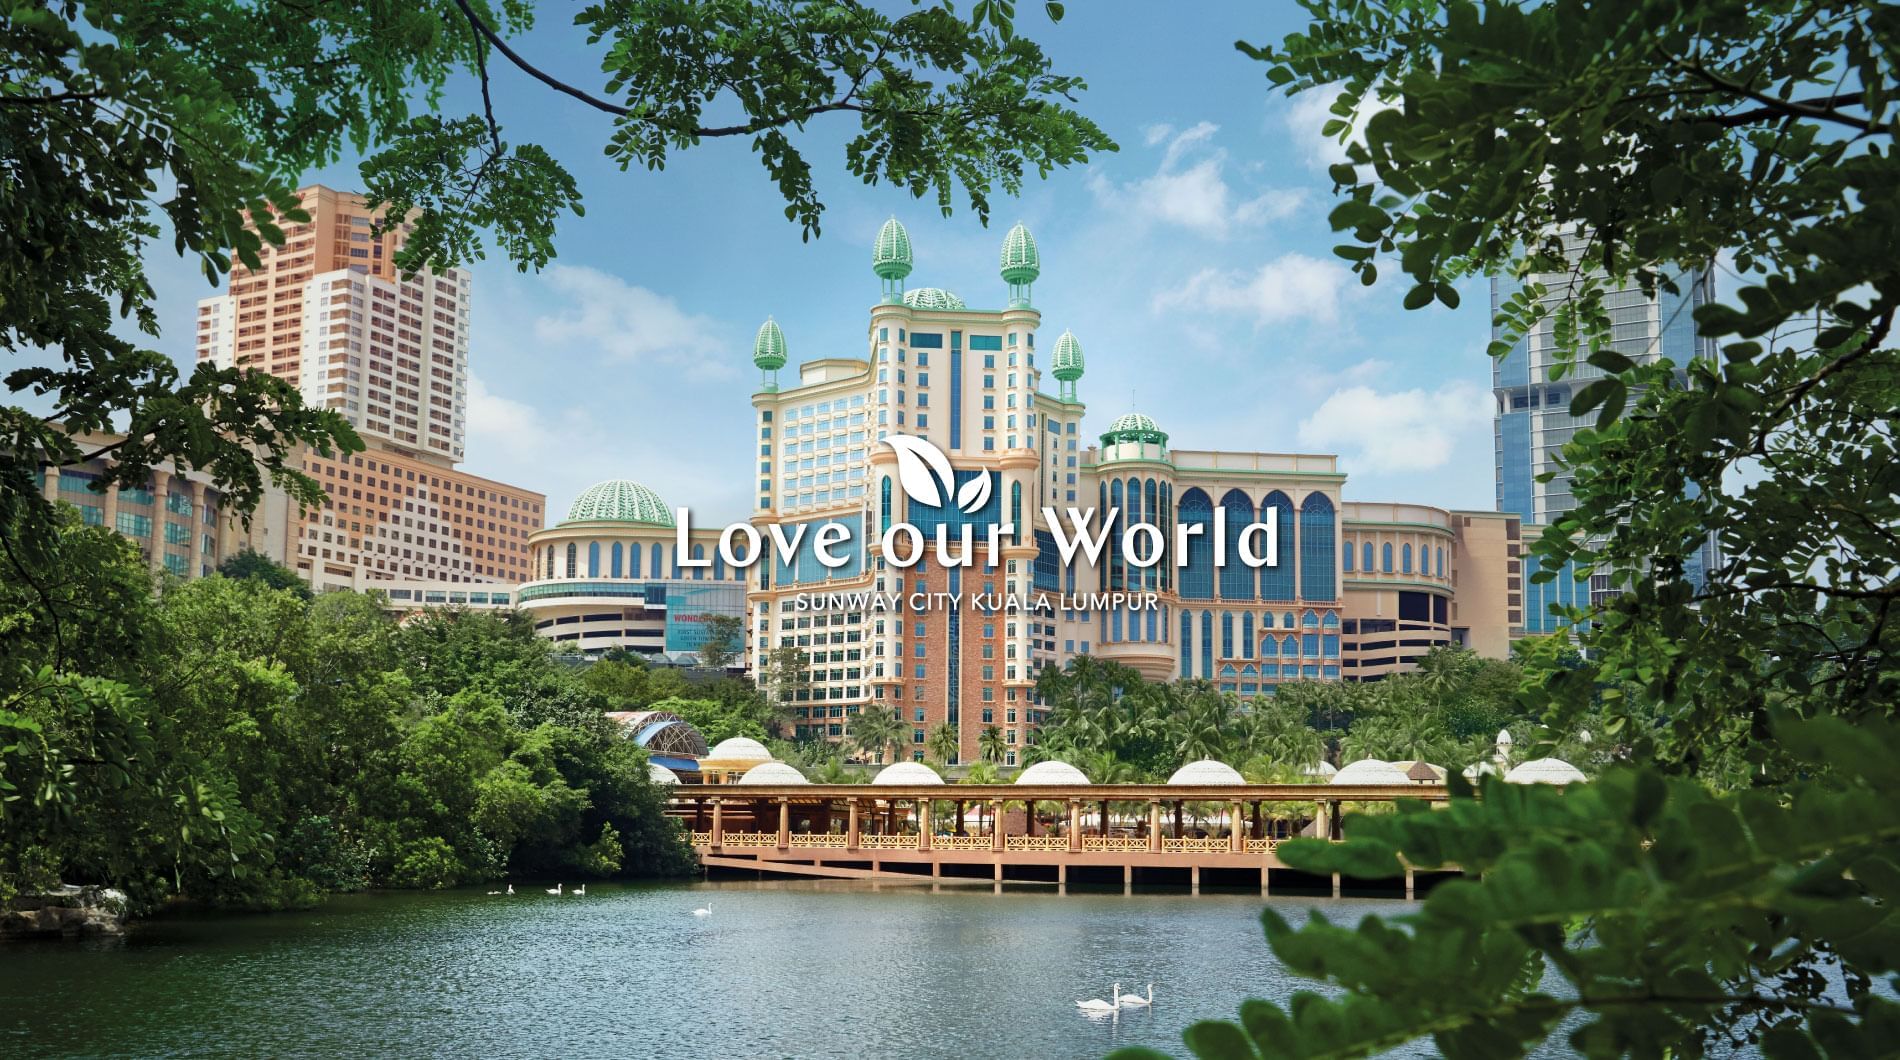 Love the world poster with hotel image used at Sunway Resort